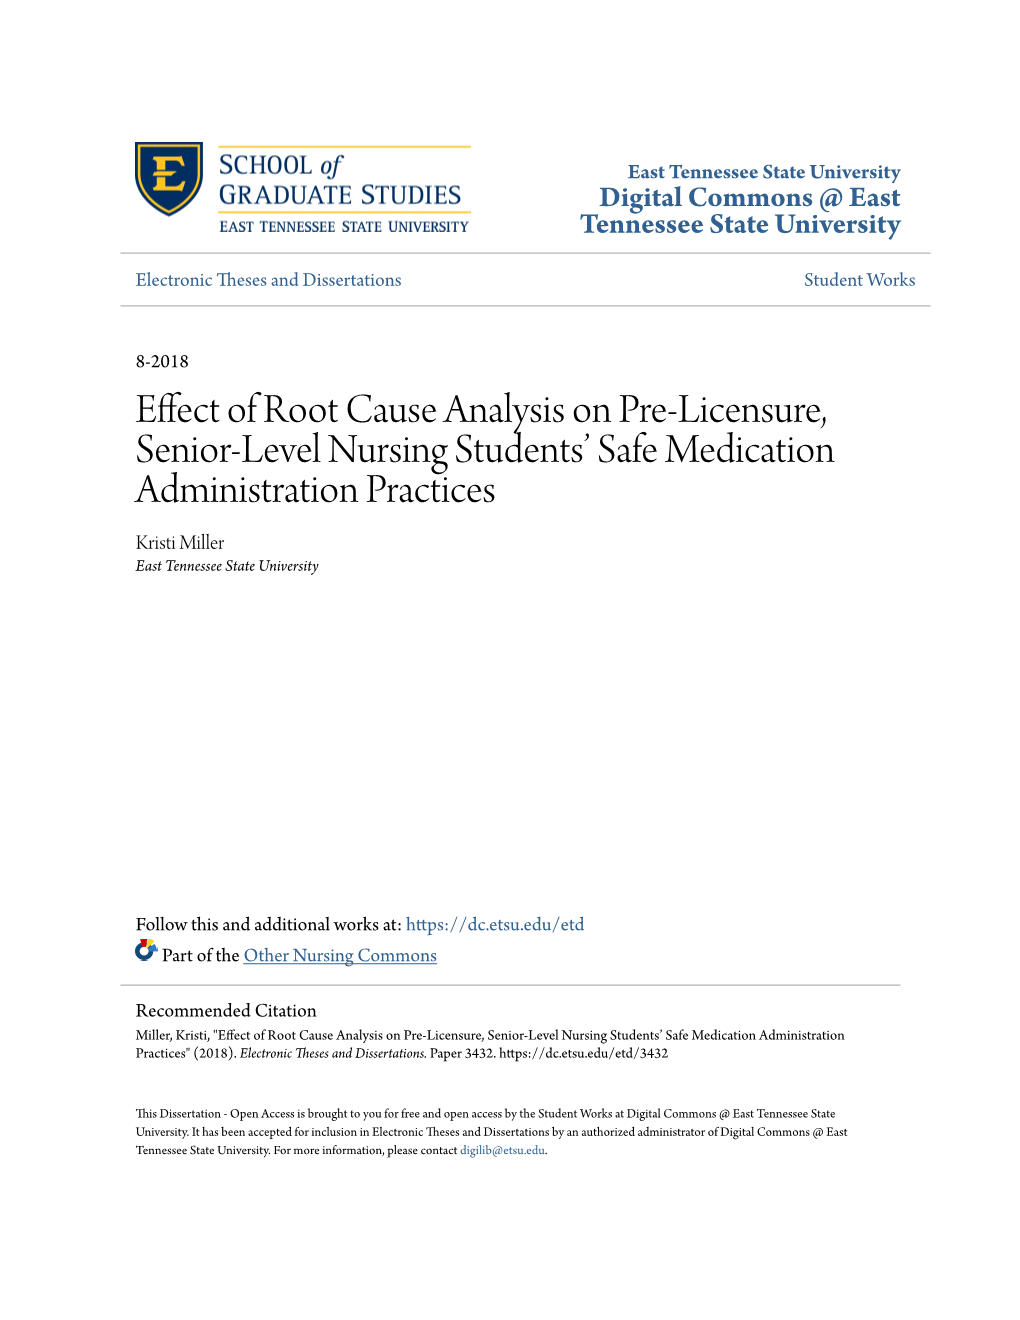 Effect of Root Cause Analysis on Pre-Licensure, Senior-Level Nursing Students’ Safe Medication Administration Practices Kristi Miller East Tennessee State University